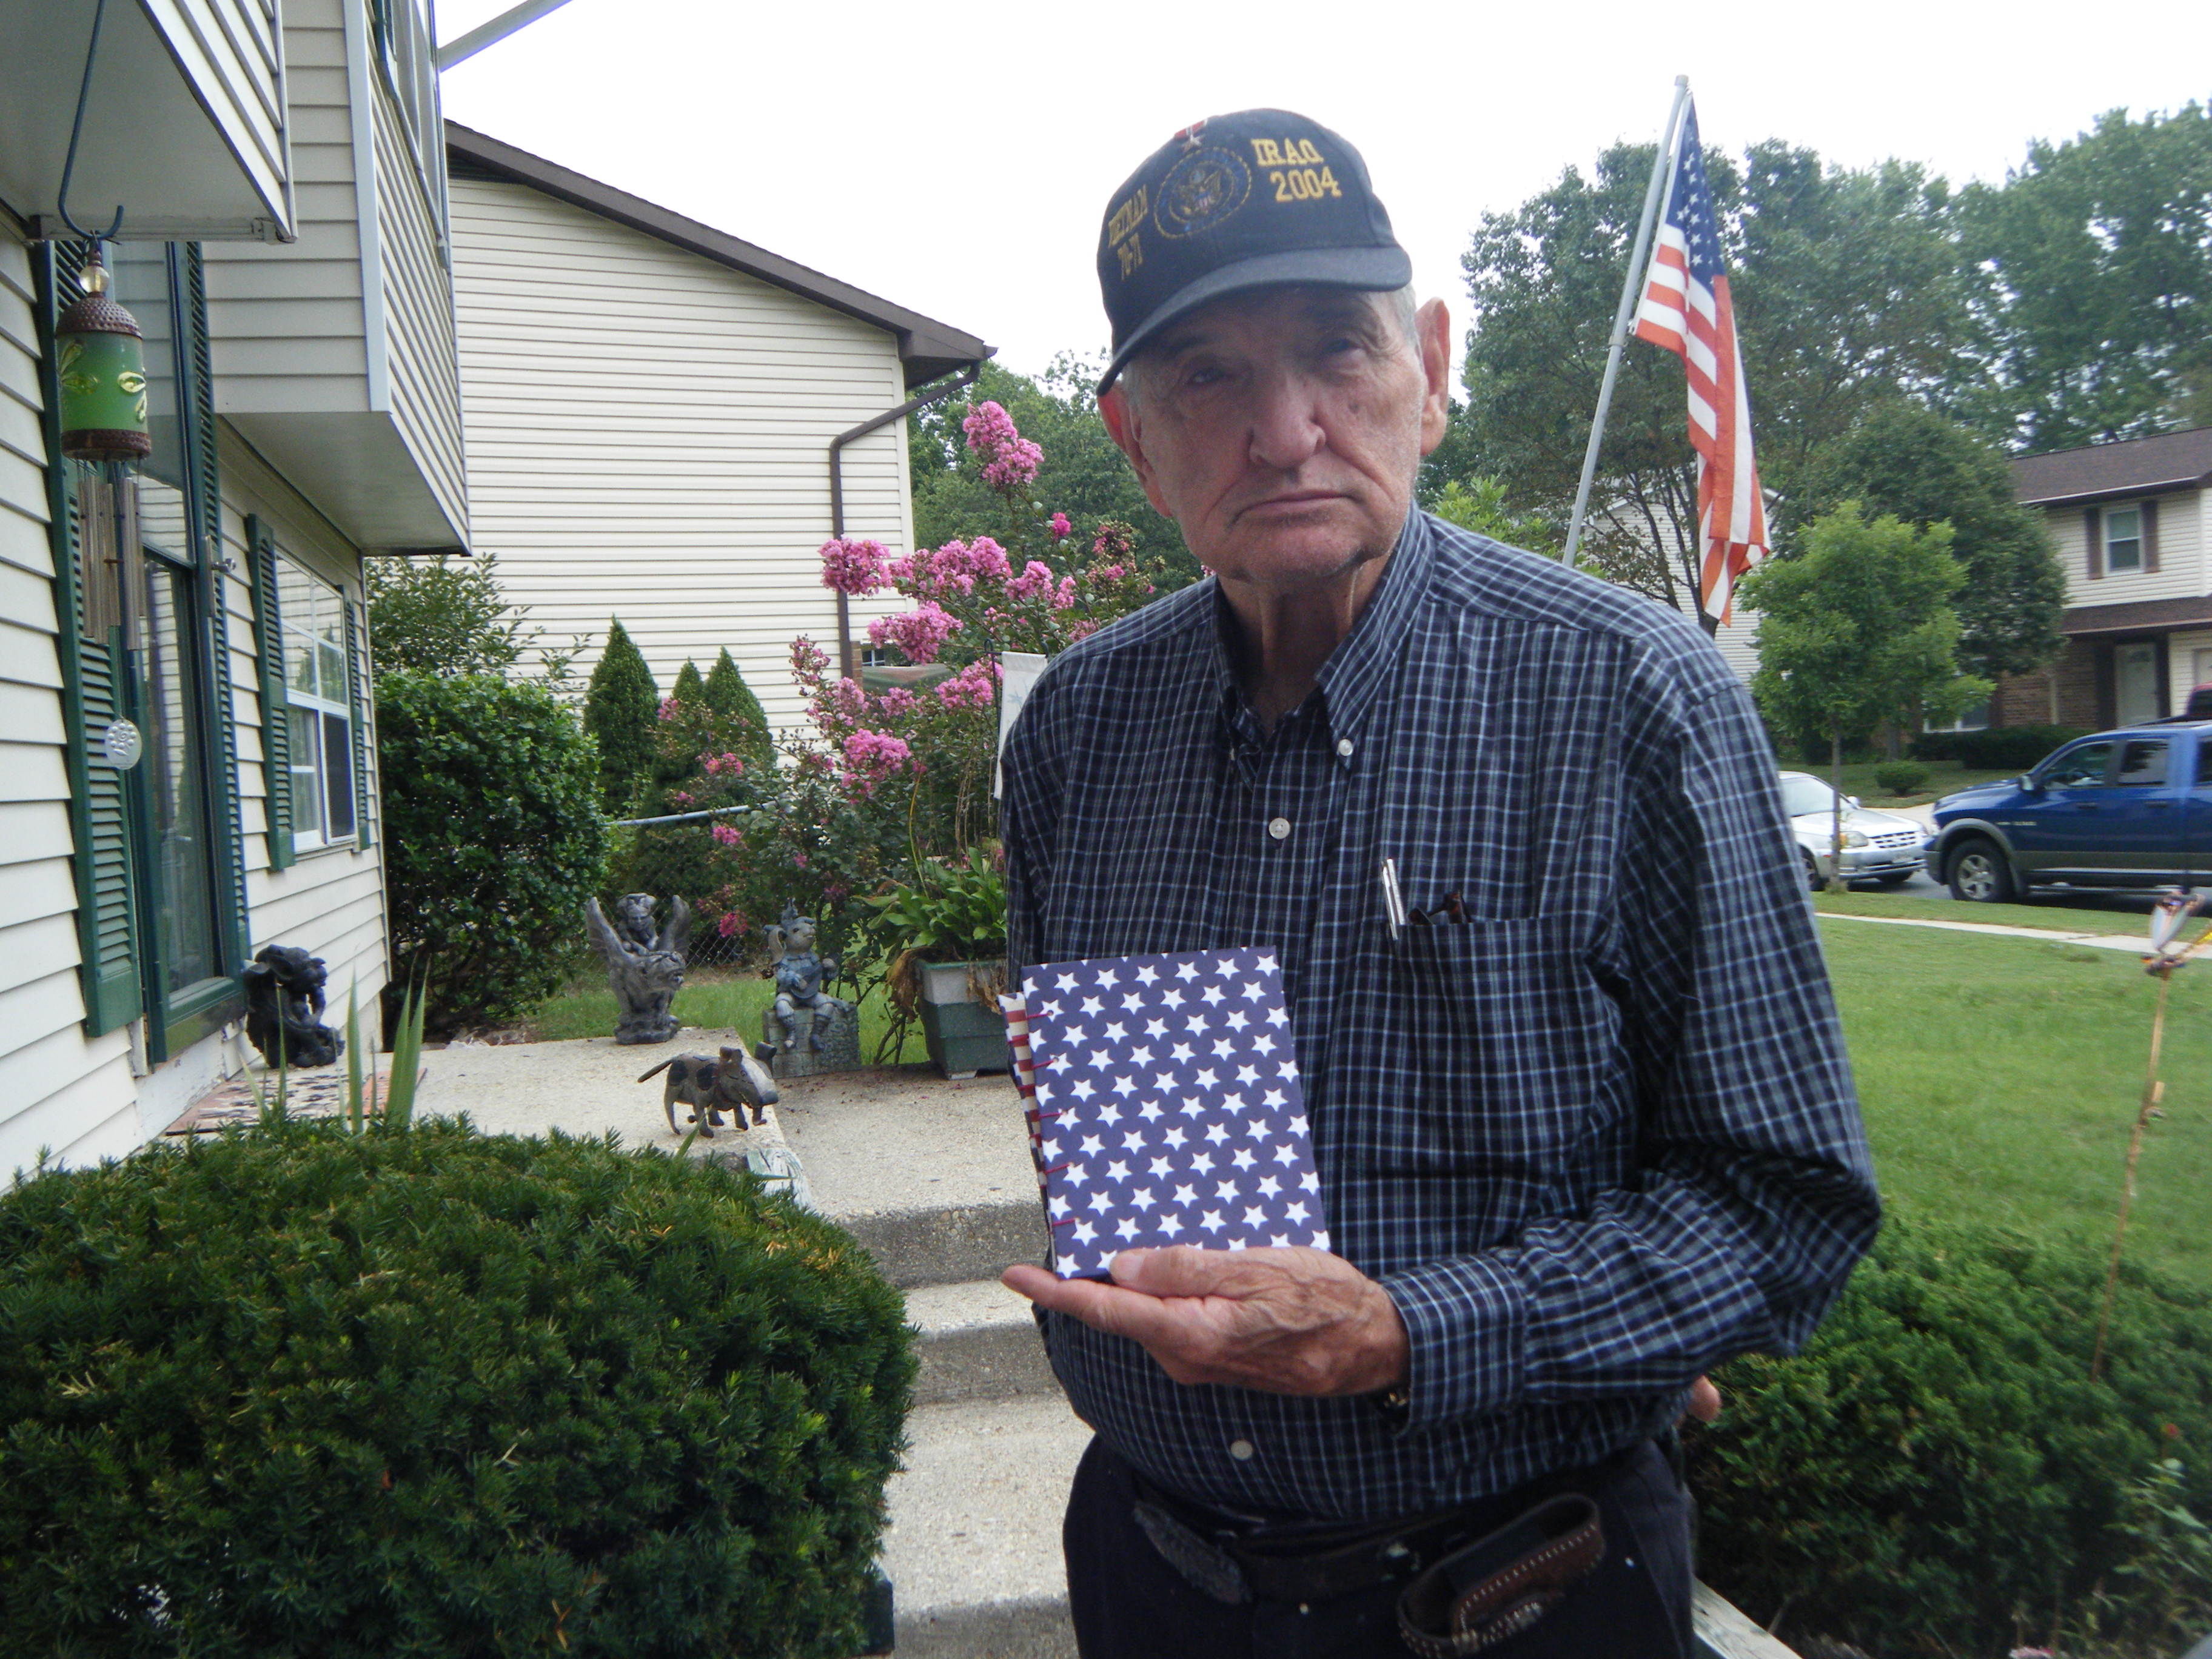 Don with the book he made - August 2012